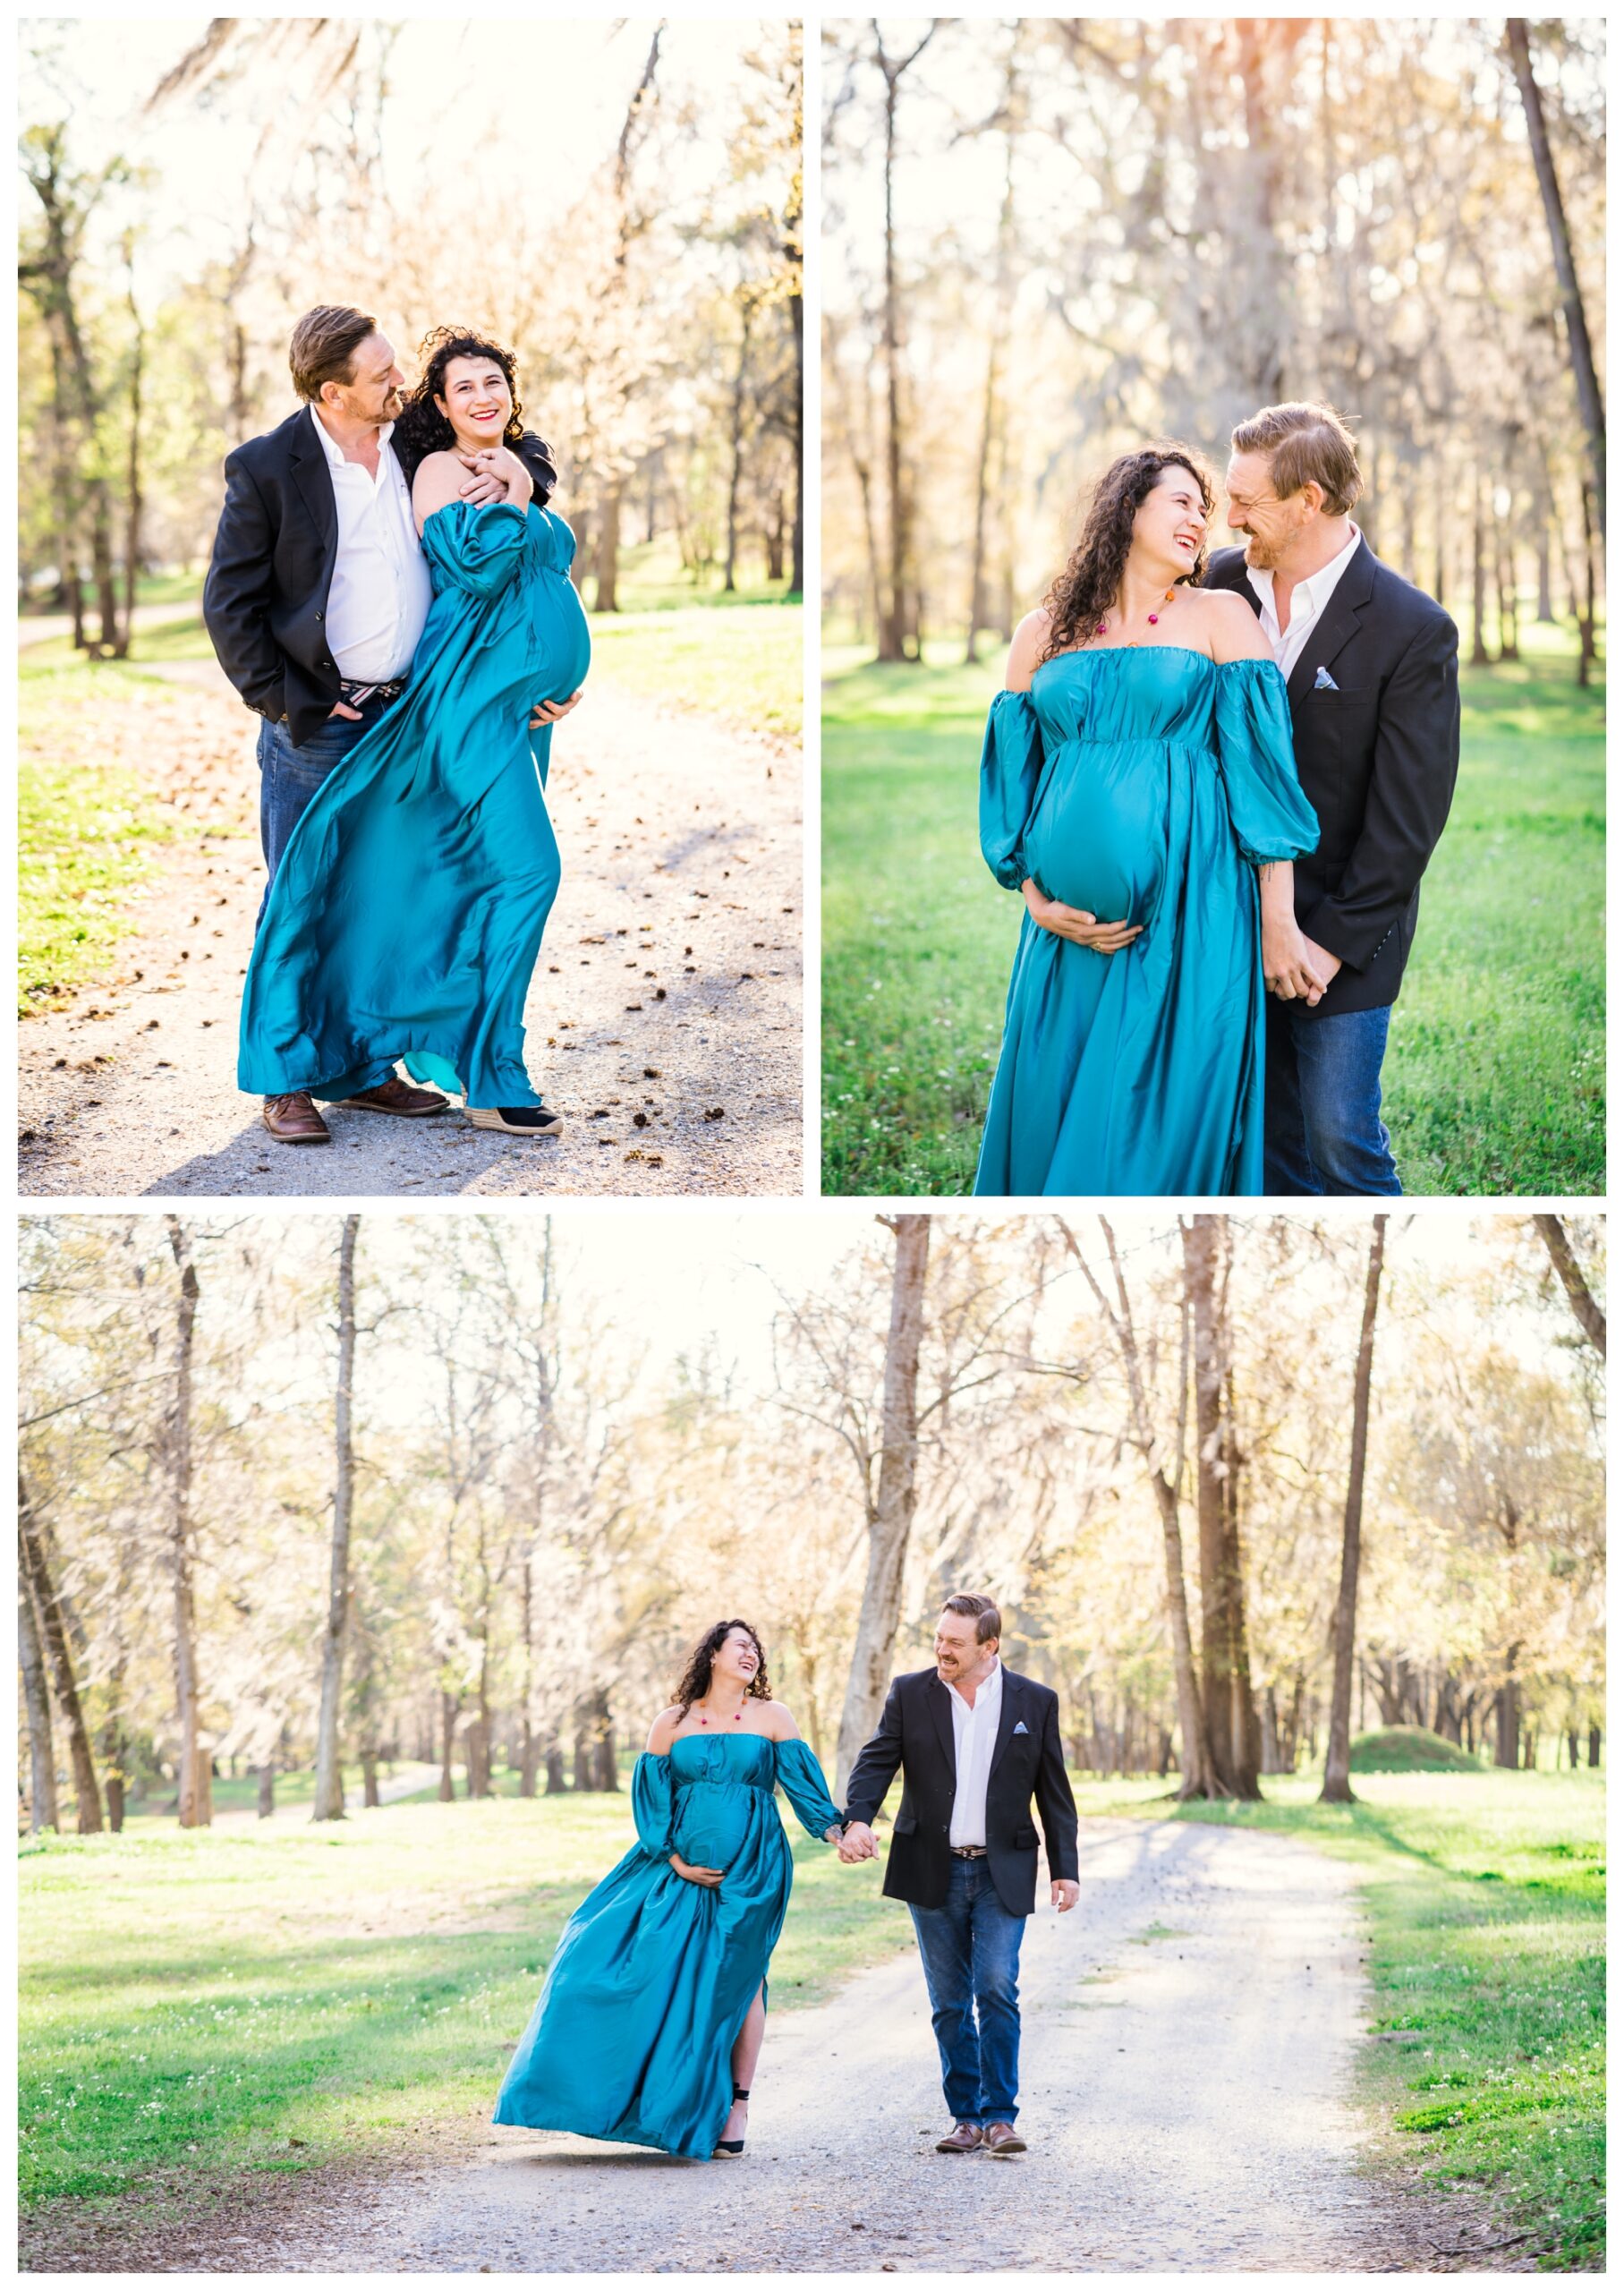 Couple together for maternity photos | Melissa Sheridan Photography 